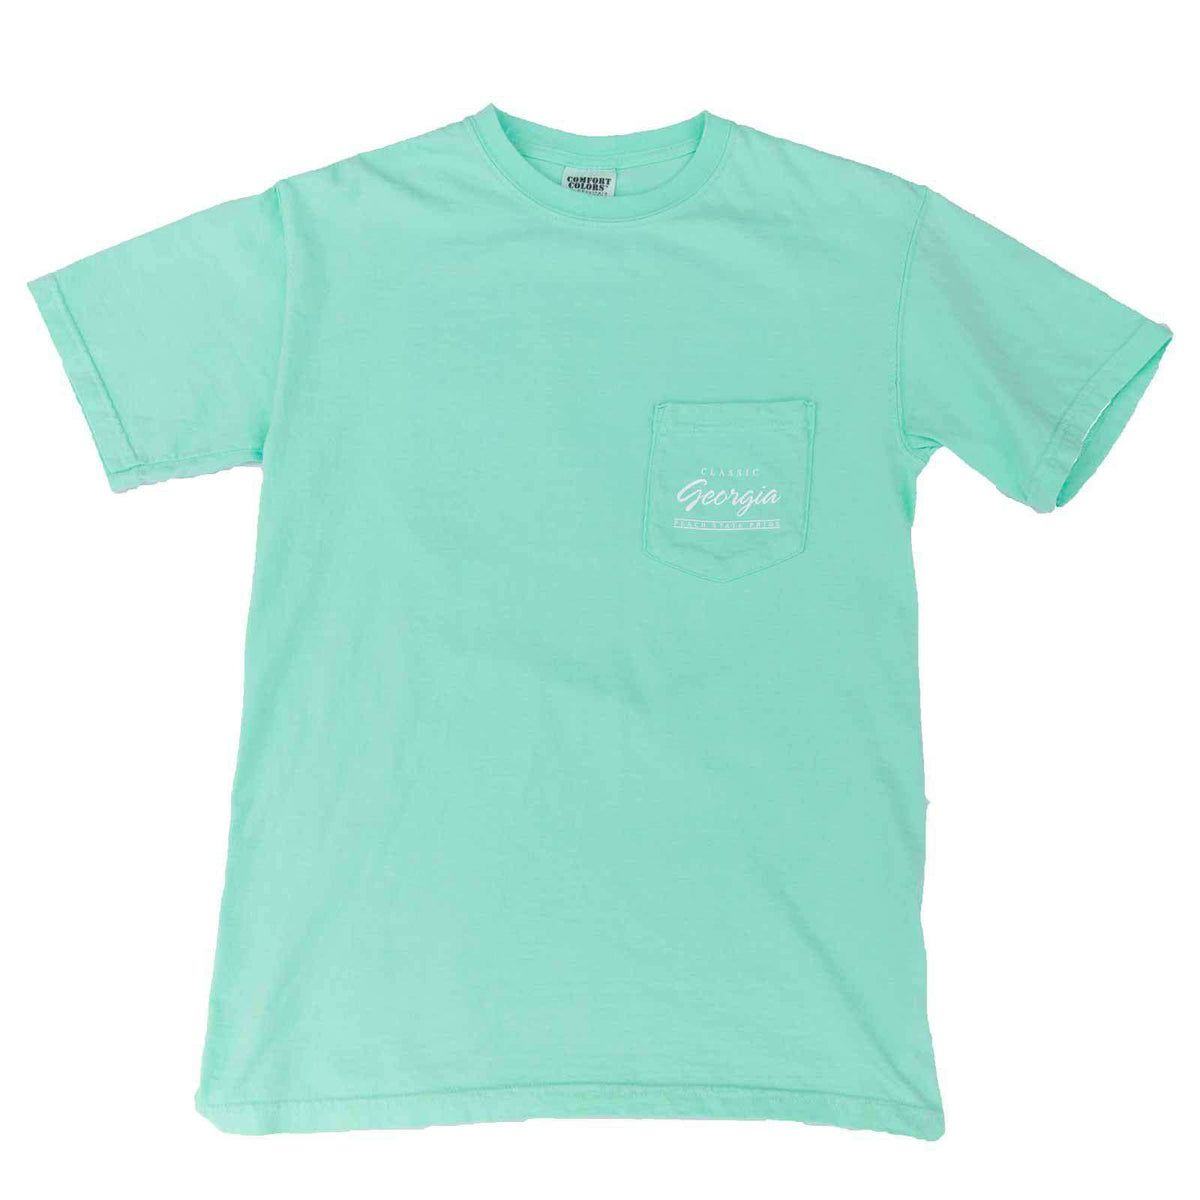 The Good Stuff Short Sleeve Tee in Island Reef by Peach State Pride - Country Club Prep